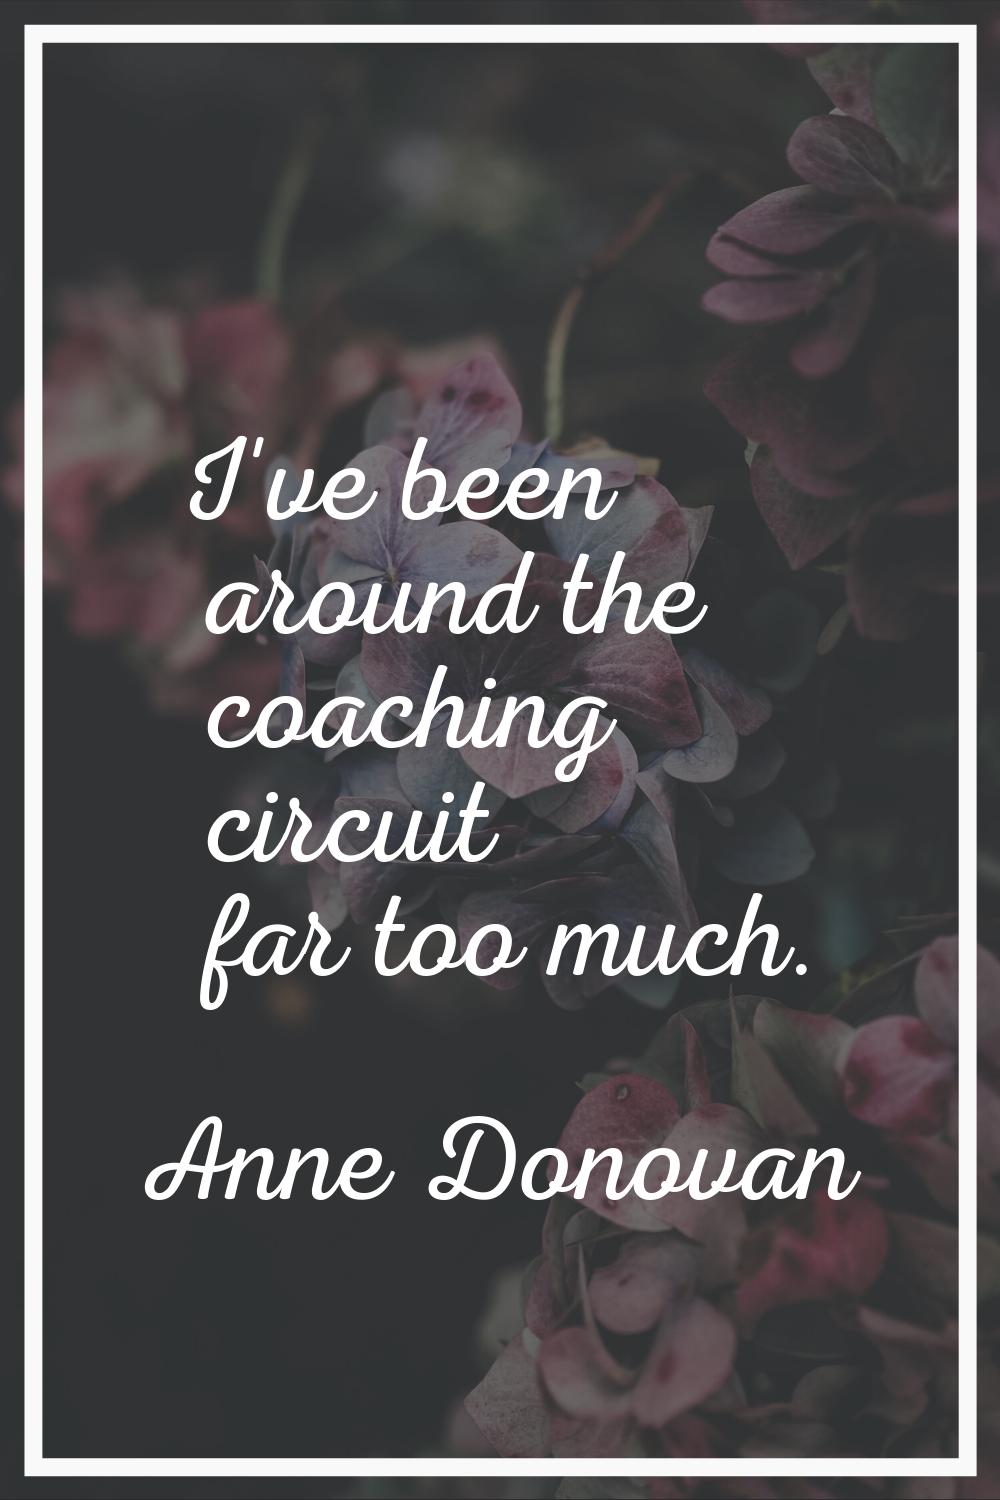 I've been around the coaching circuit far too much.